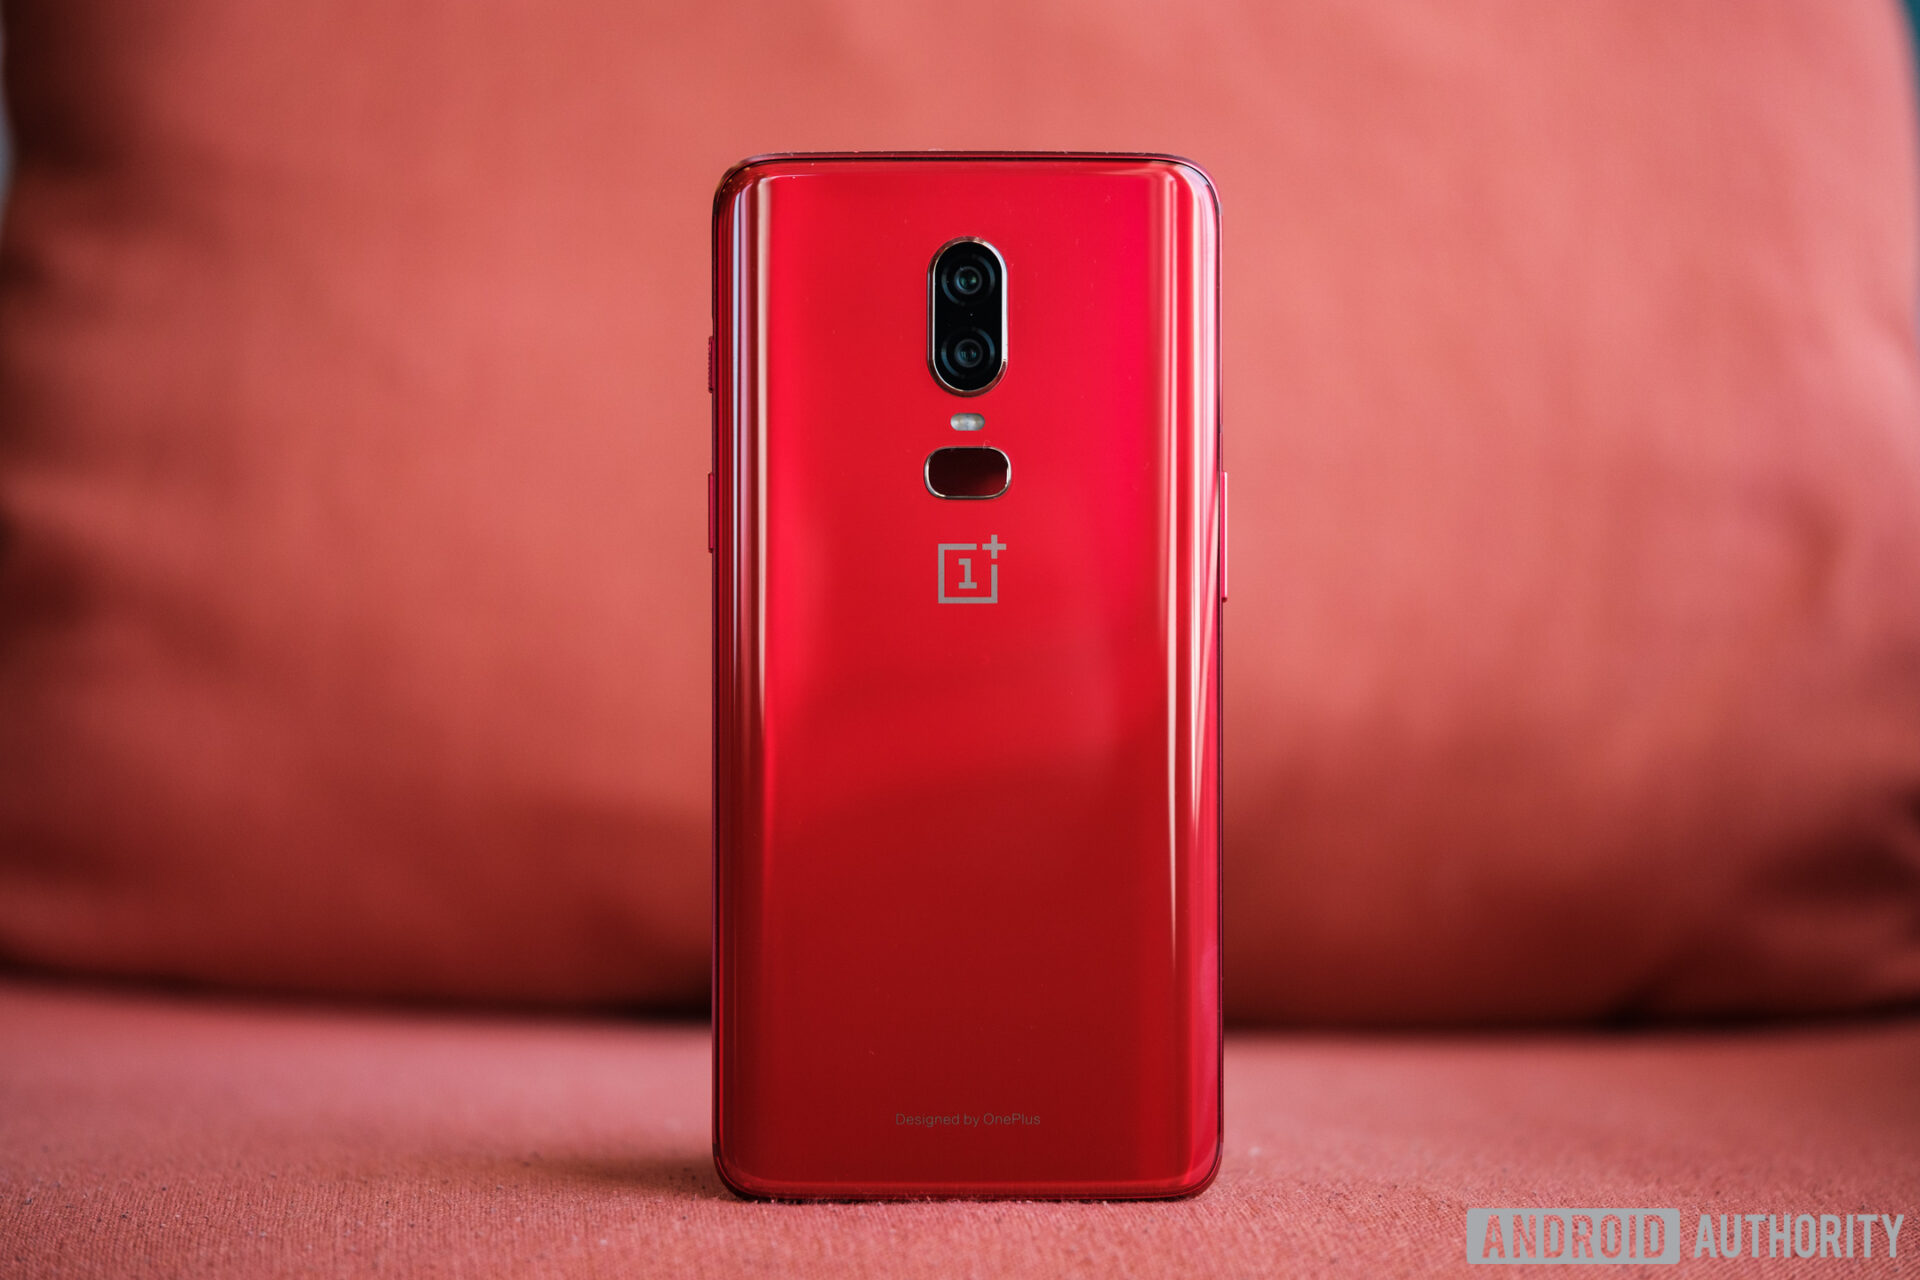 OnePlus confirms an In-display fingerprint scanner with upcoming OnePlus 6T priced at $550